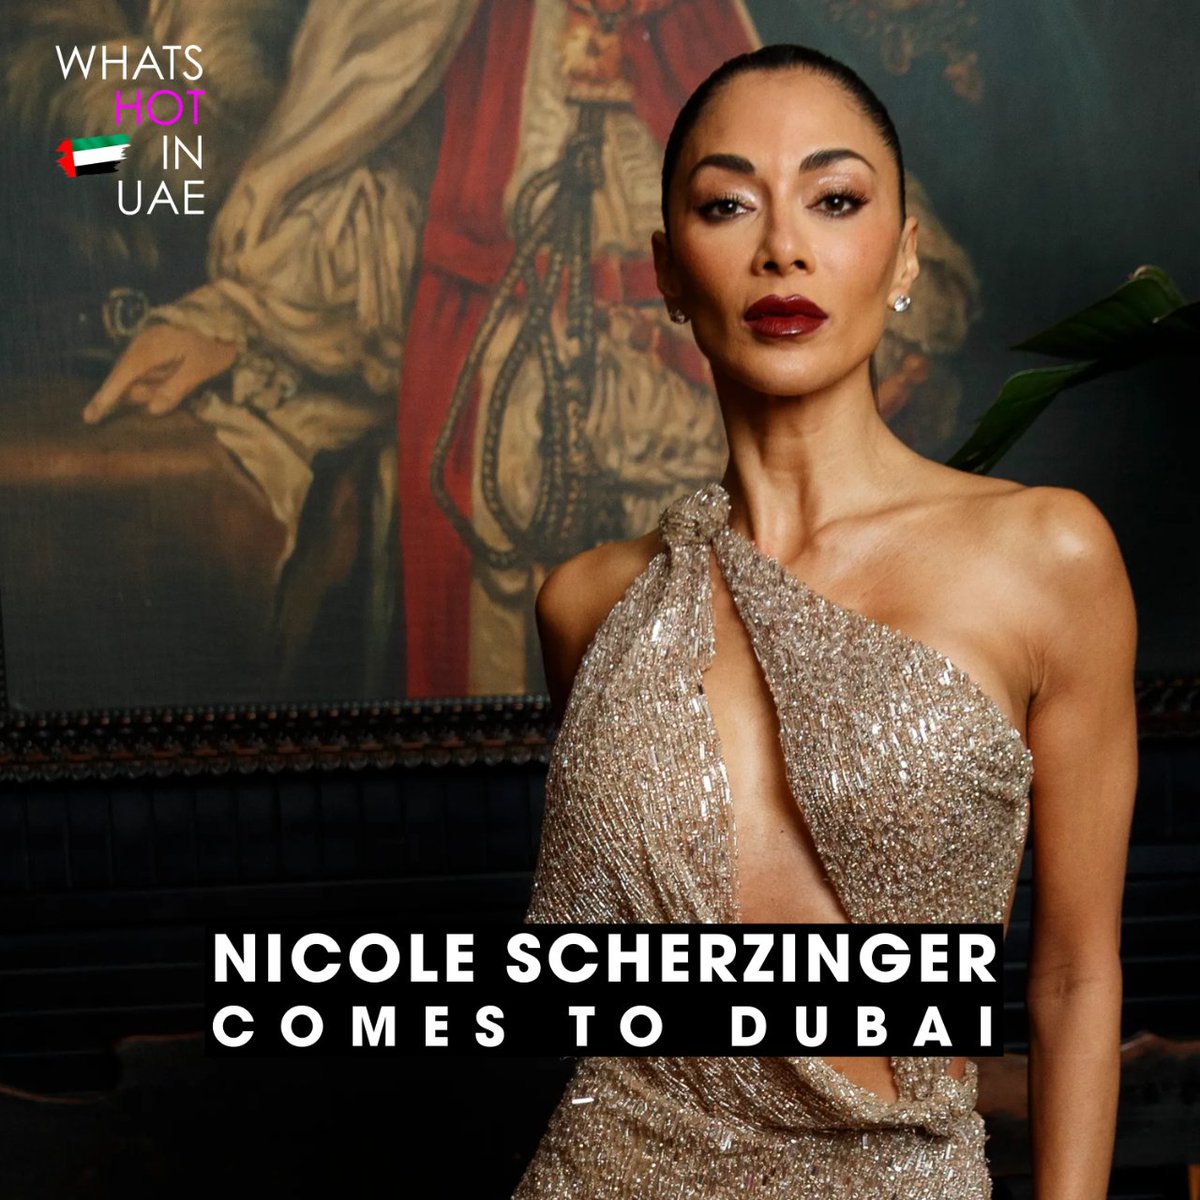 Nicole Scherzinger, the dynamic artist whose vocals have dominated charts and stages worldwide, teams up with the iconic rapper T.I., a trailblazer in the hip-hop scene, for a spectacular concert that promises to be an unforgettable gathering of talent.